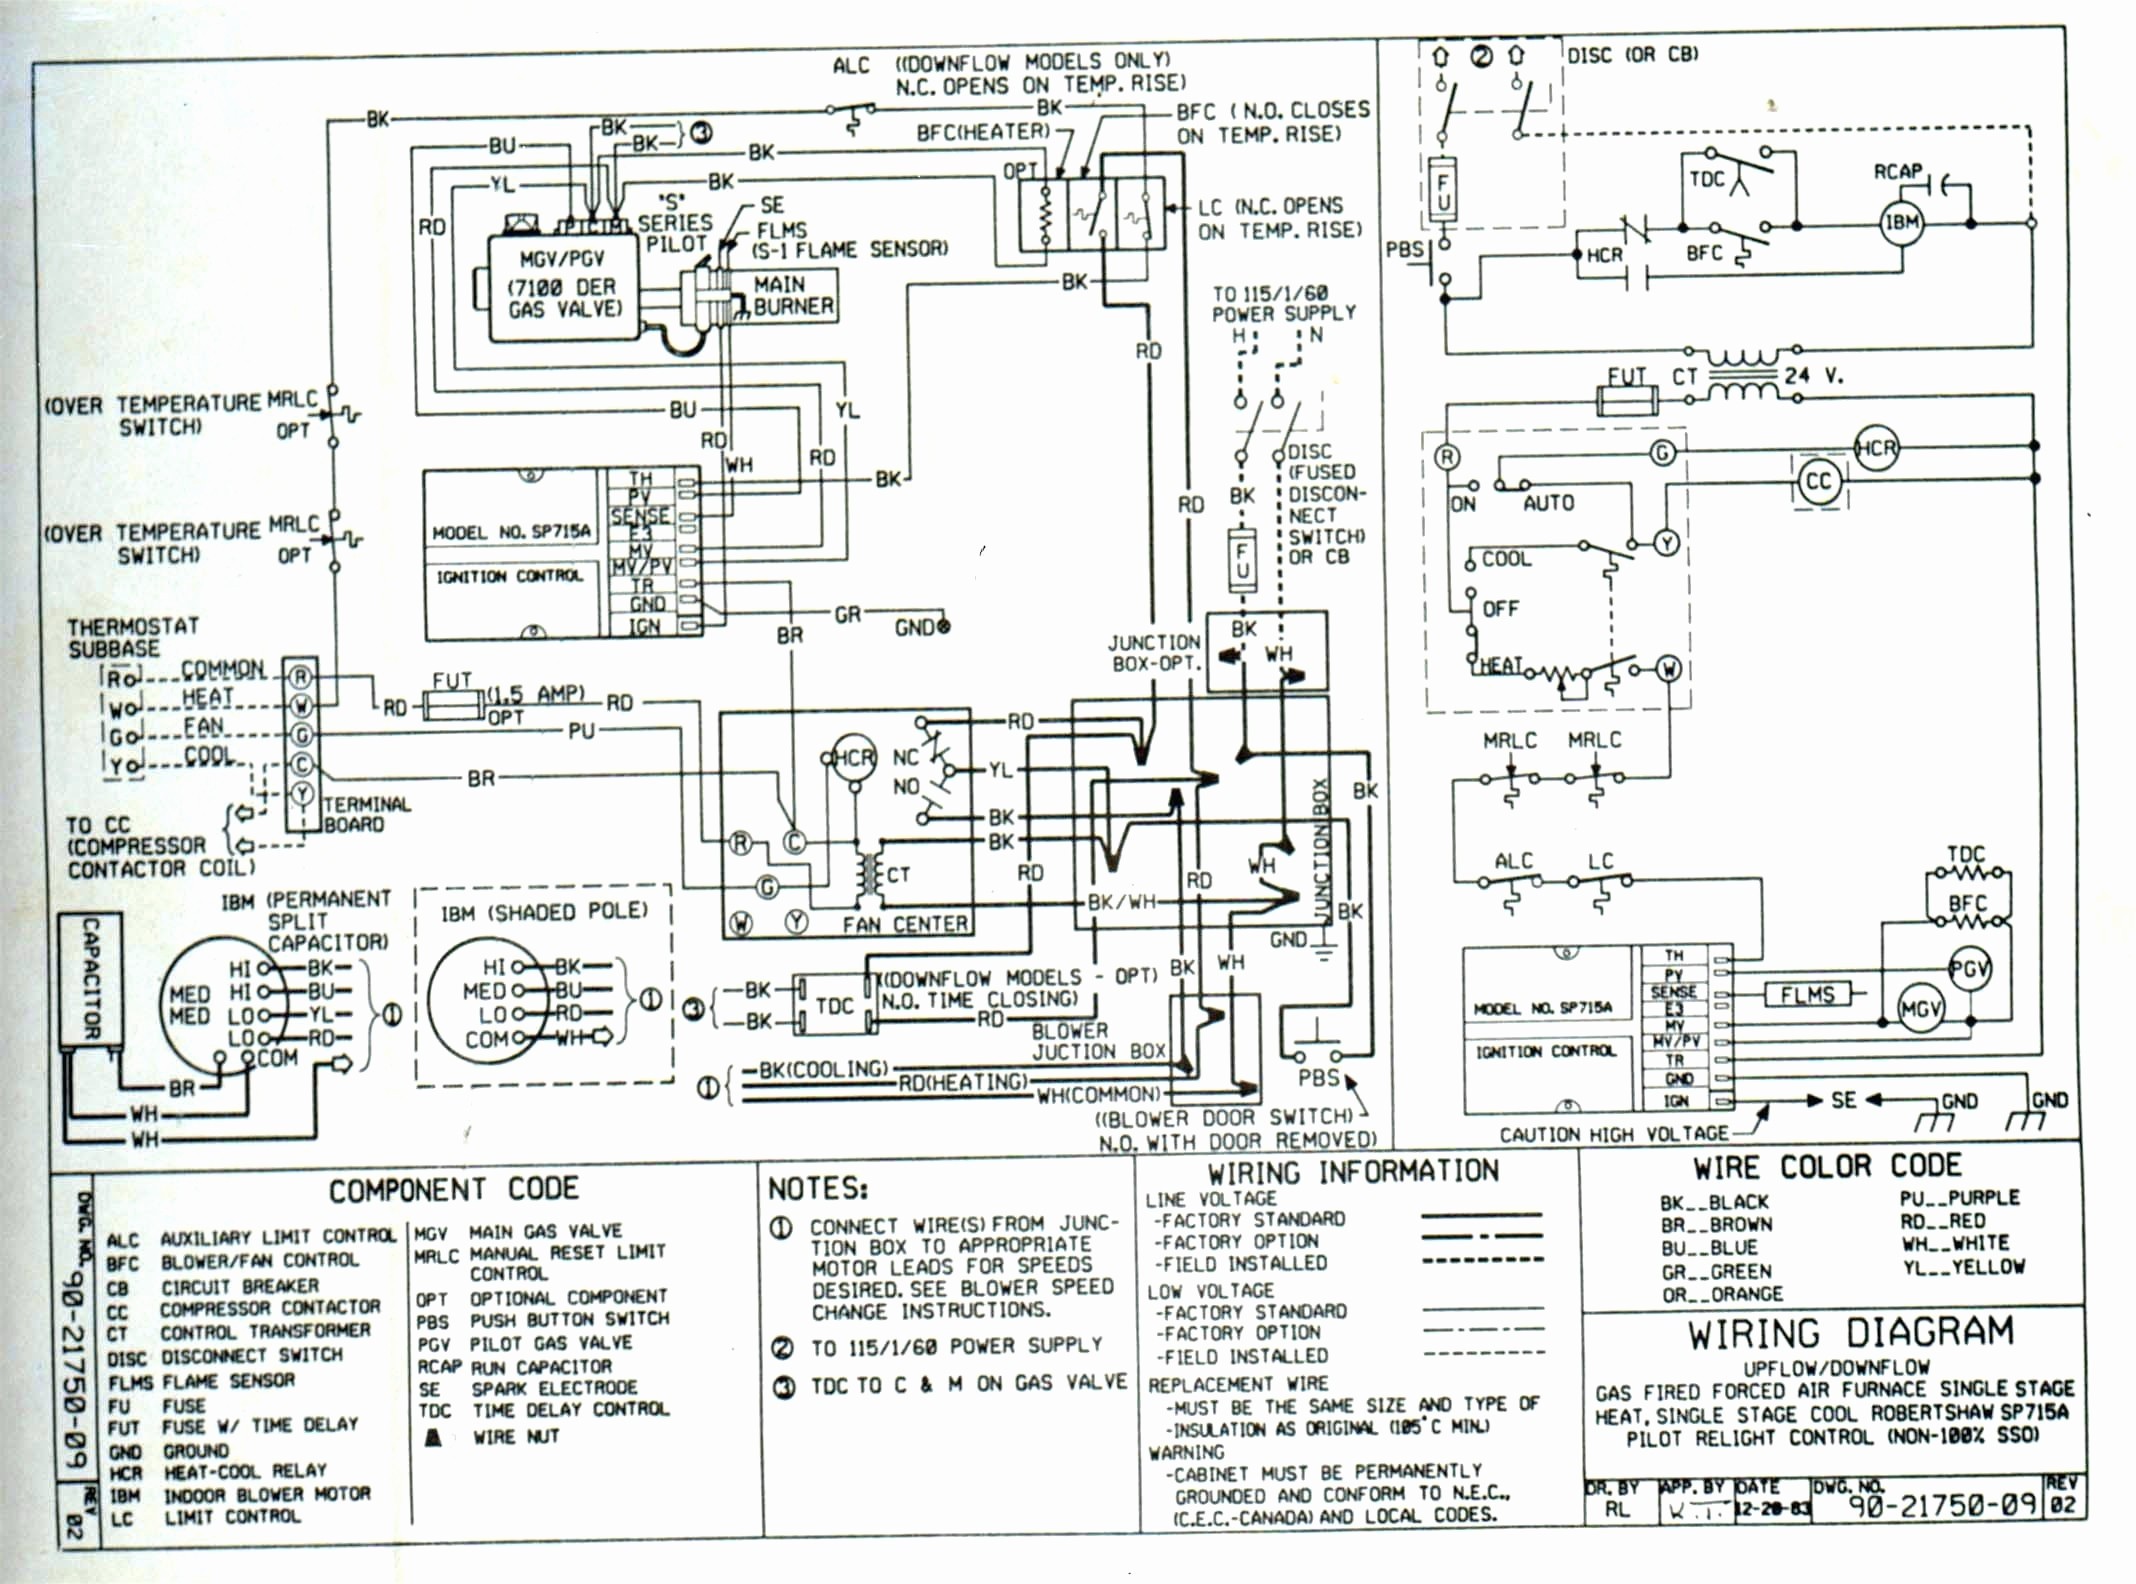 How to Read Wiring Diagrams for Cars New Wiring Diagram How to Read Wiring Diagrams Unique